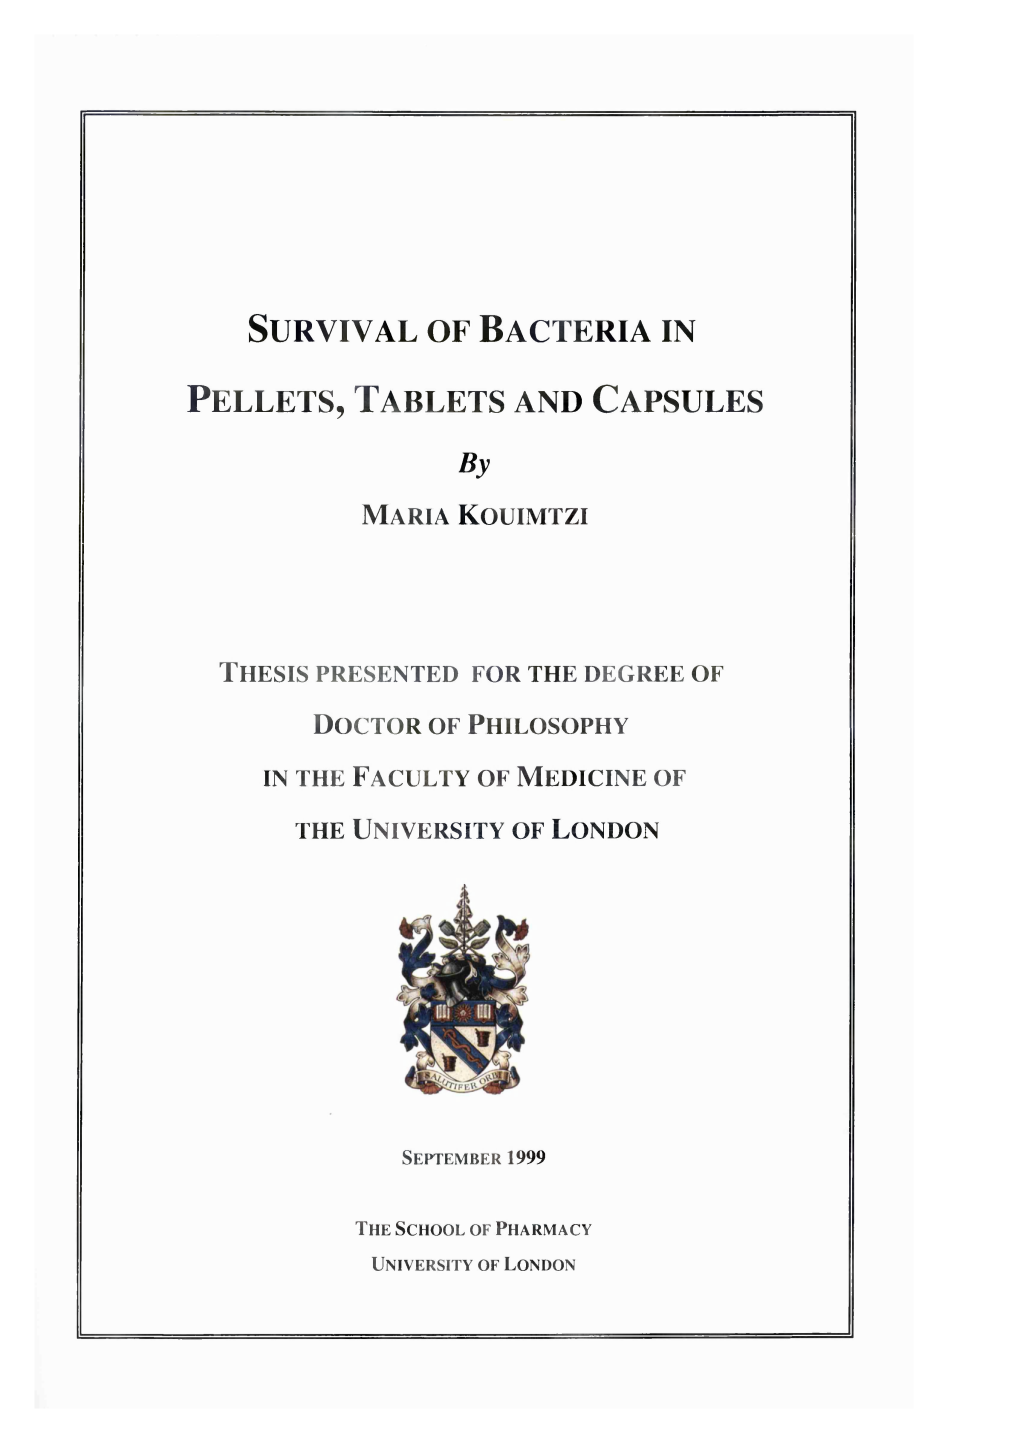 Survival of Bacteria in Pellets, Tablets and Capsules